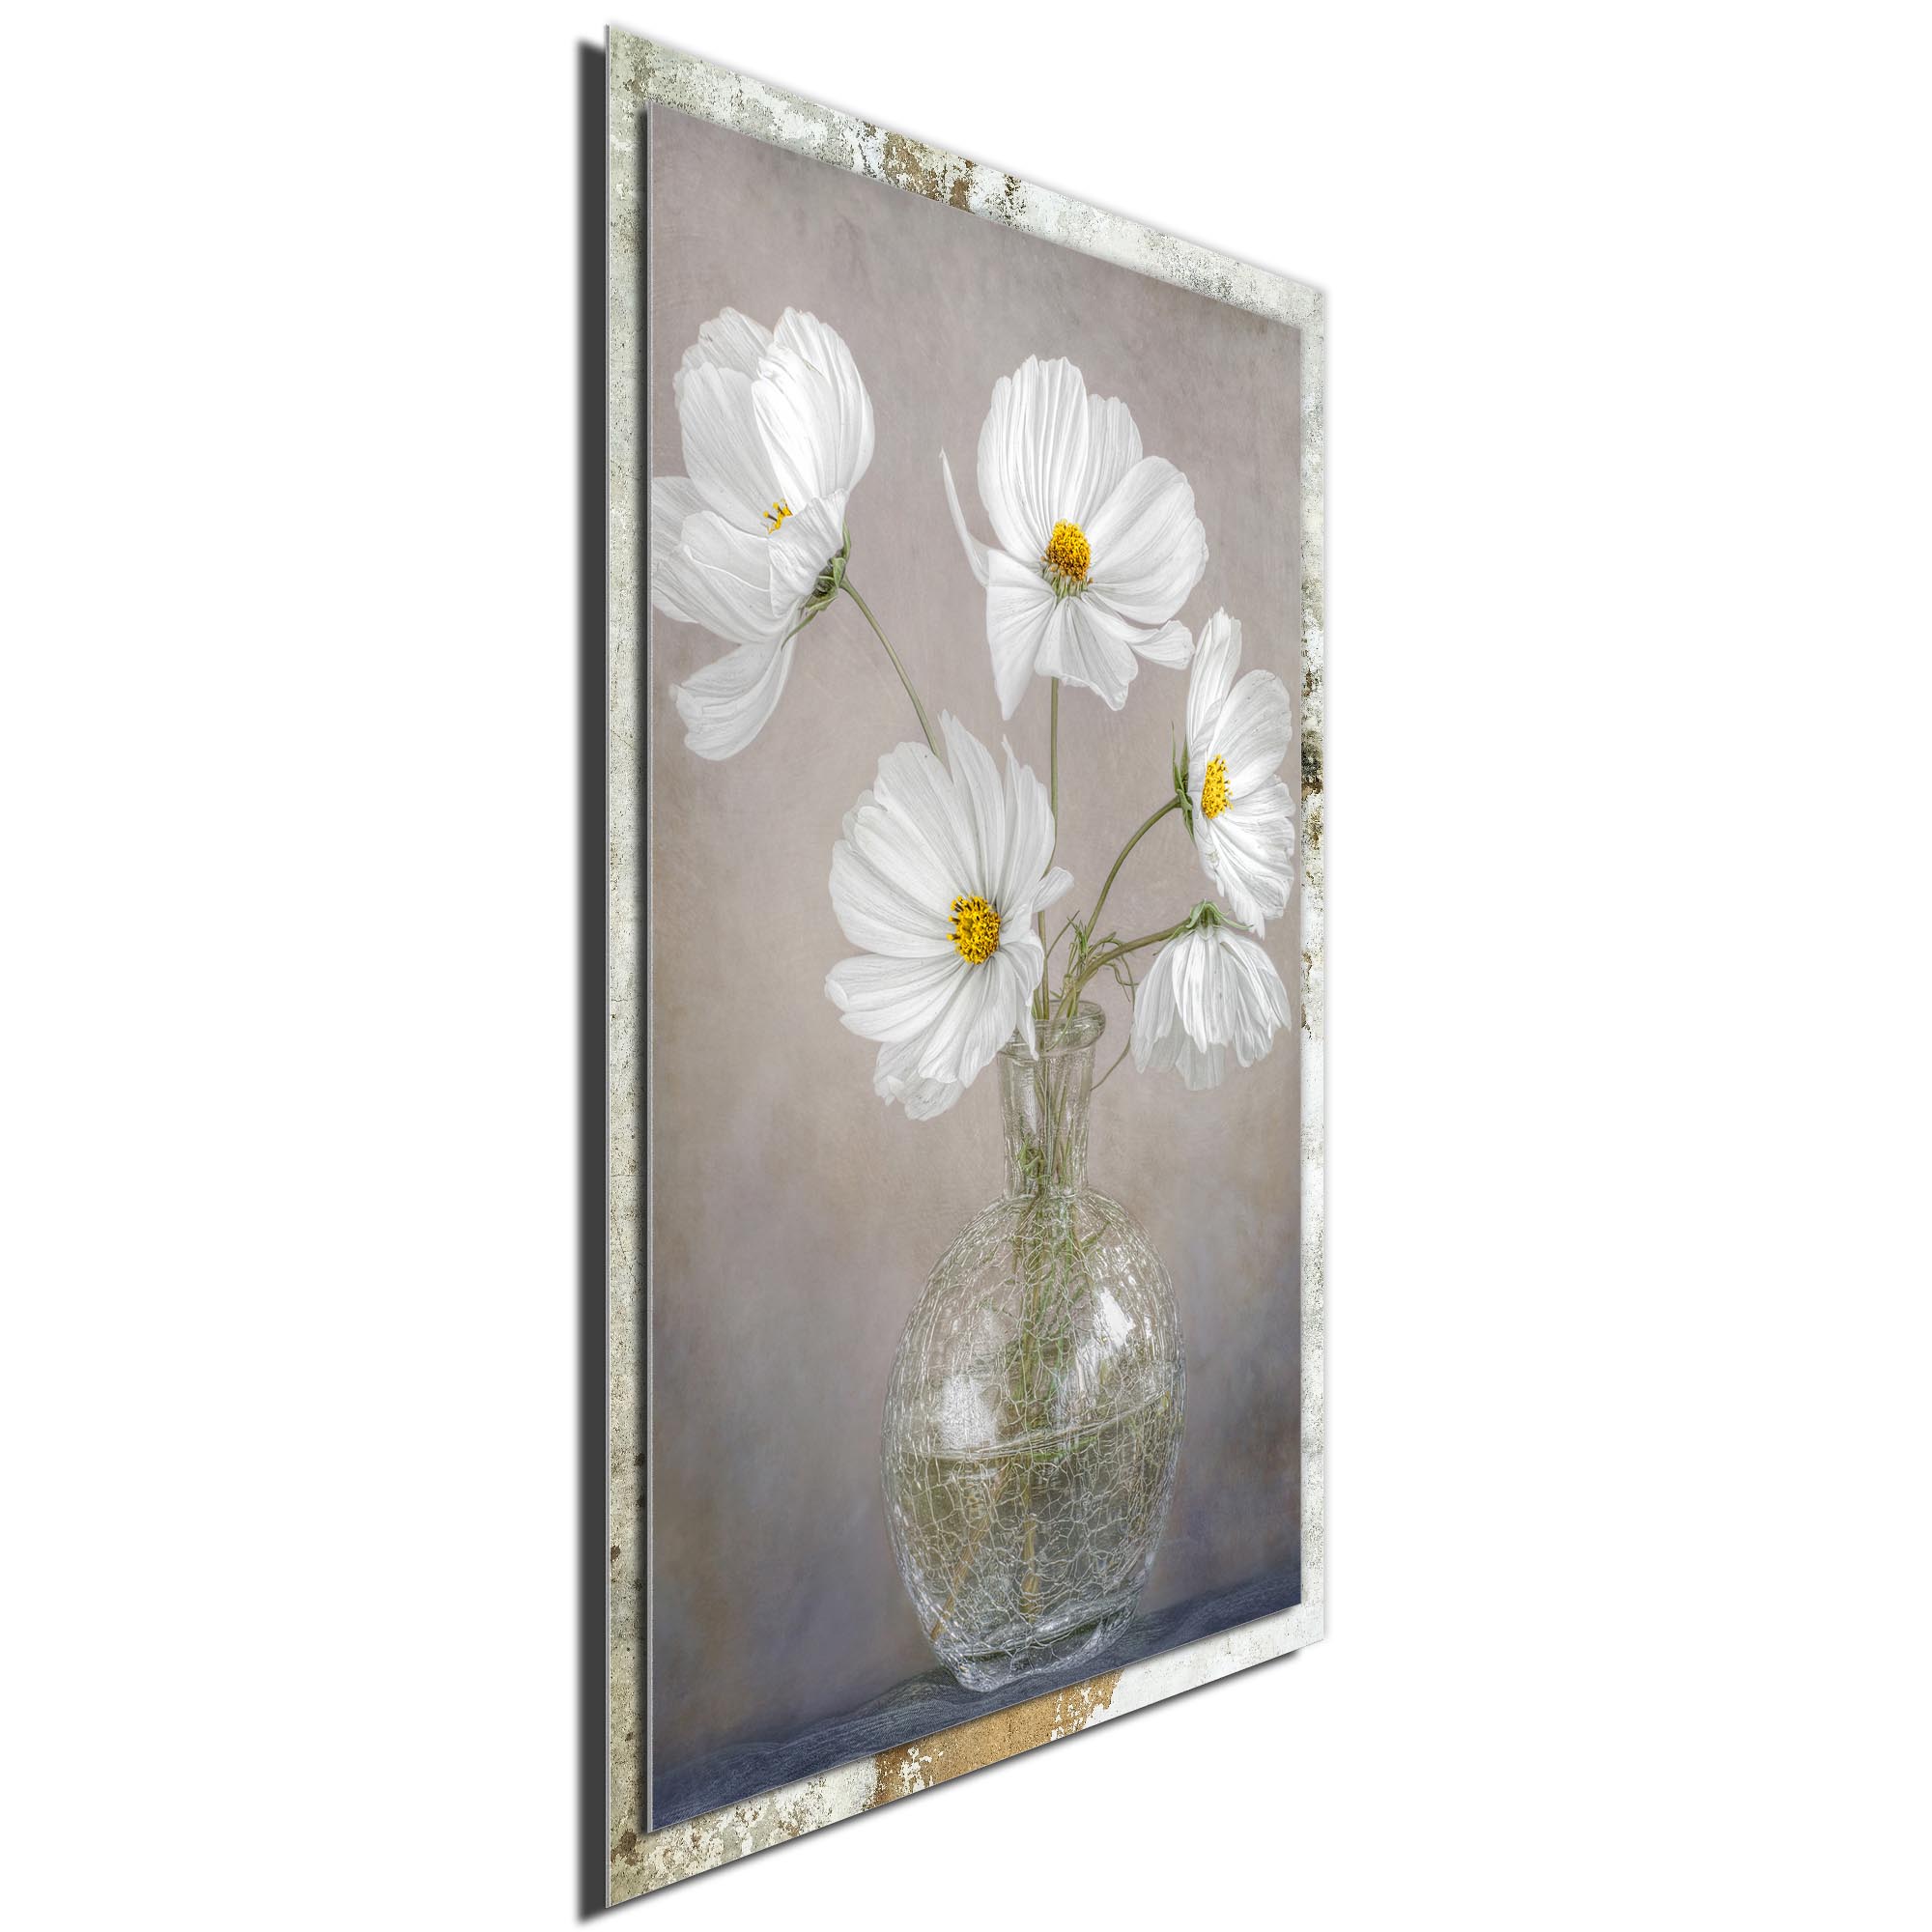 Simply Cosmos by Mandy Disher - Modern Farmhouse Floral on Metal - Image 2